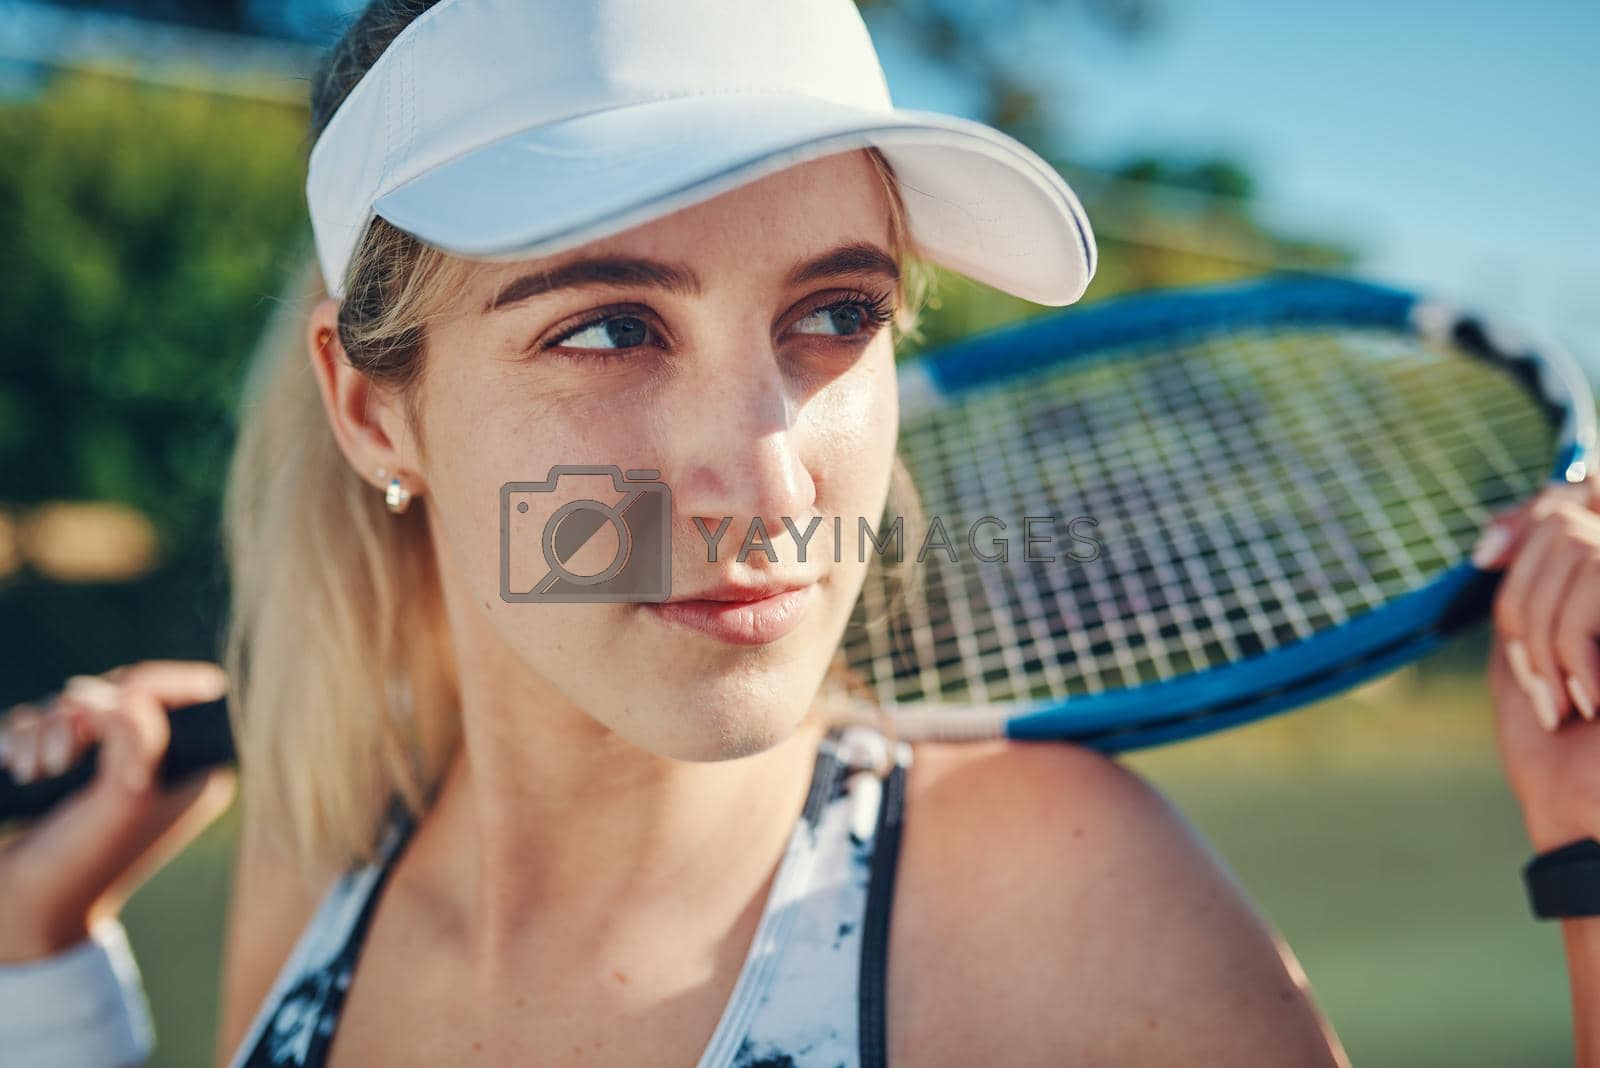 Royalty free image of Nobody who ever gave it their best regretted it. Shot of a sporty young woman standing on a tennis court with a tennis racket. by YuriArcurs